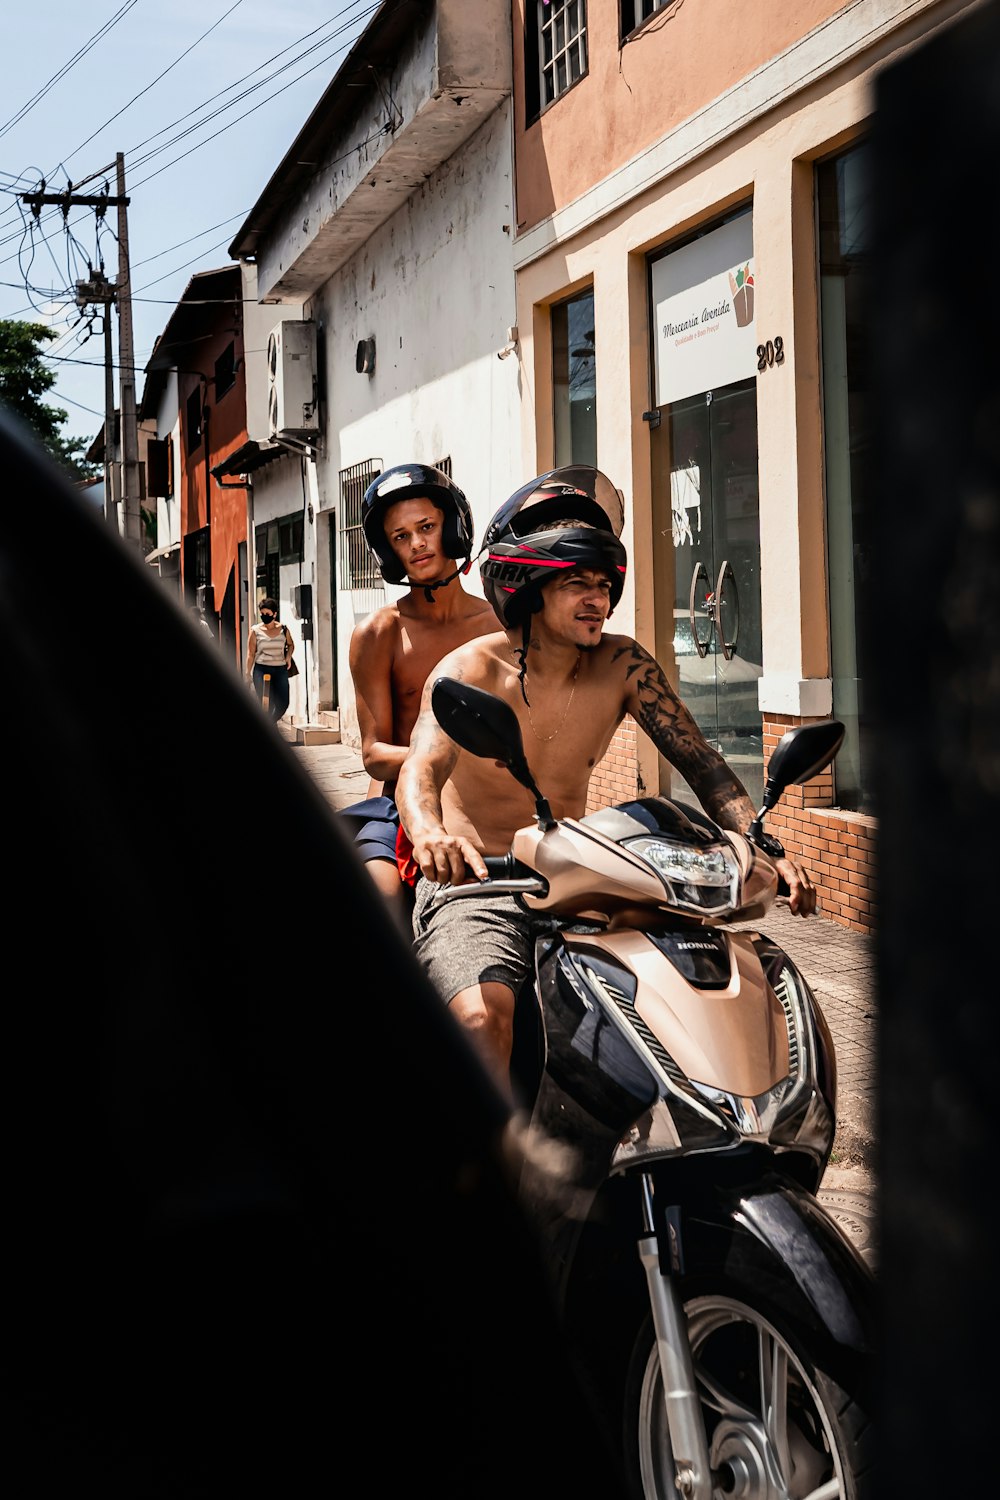 a couple of men riding on the back of a motorcycle